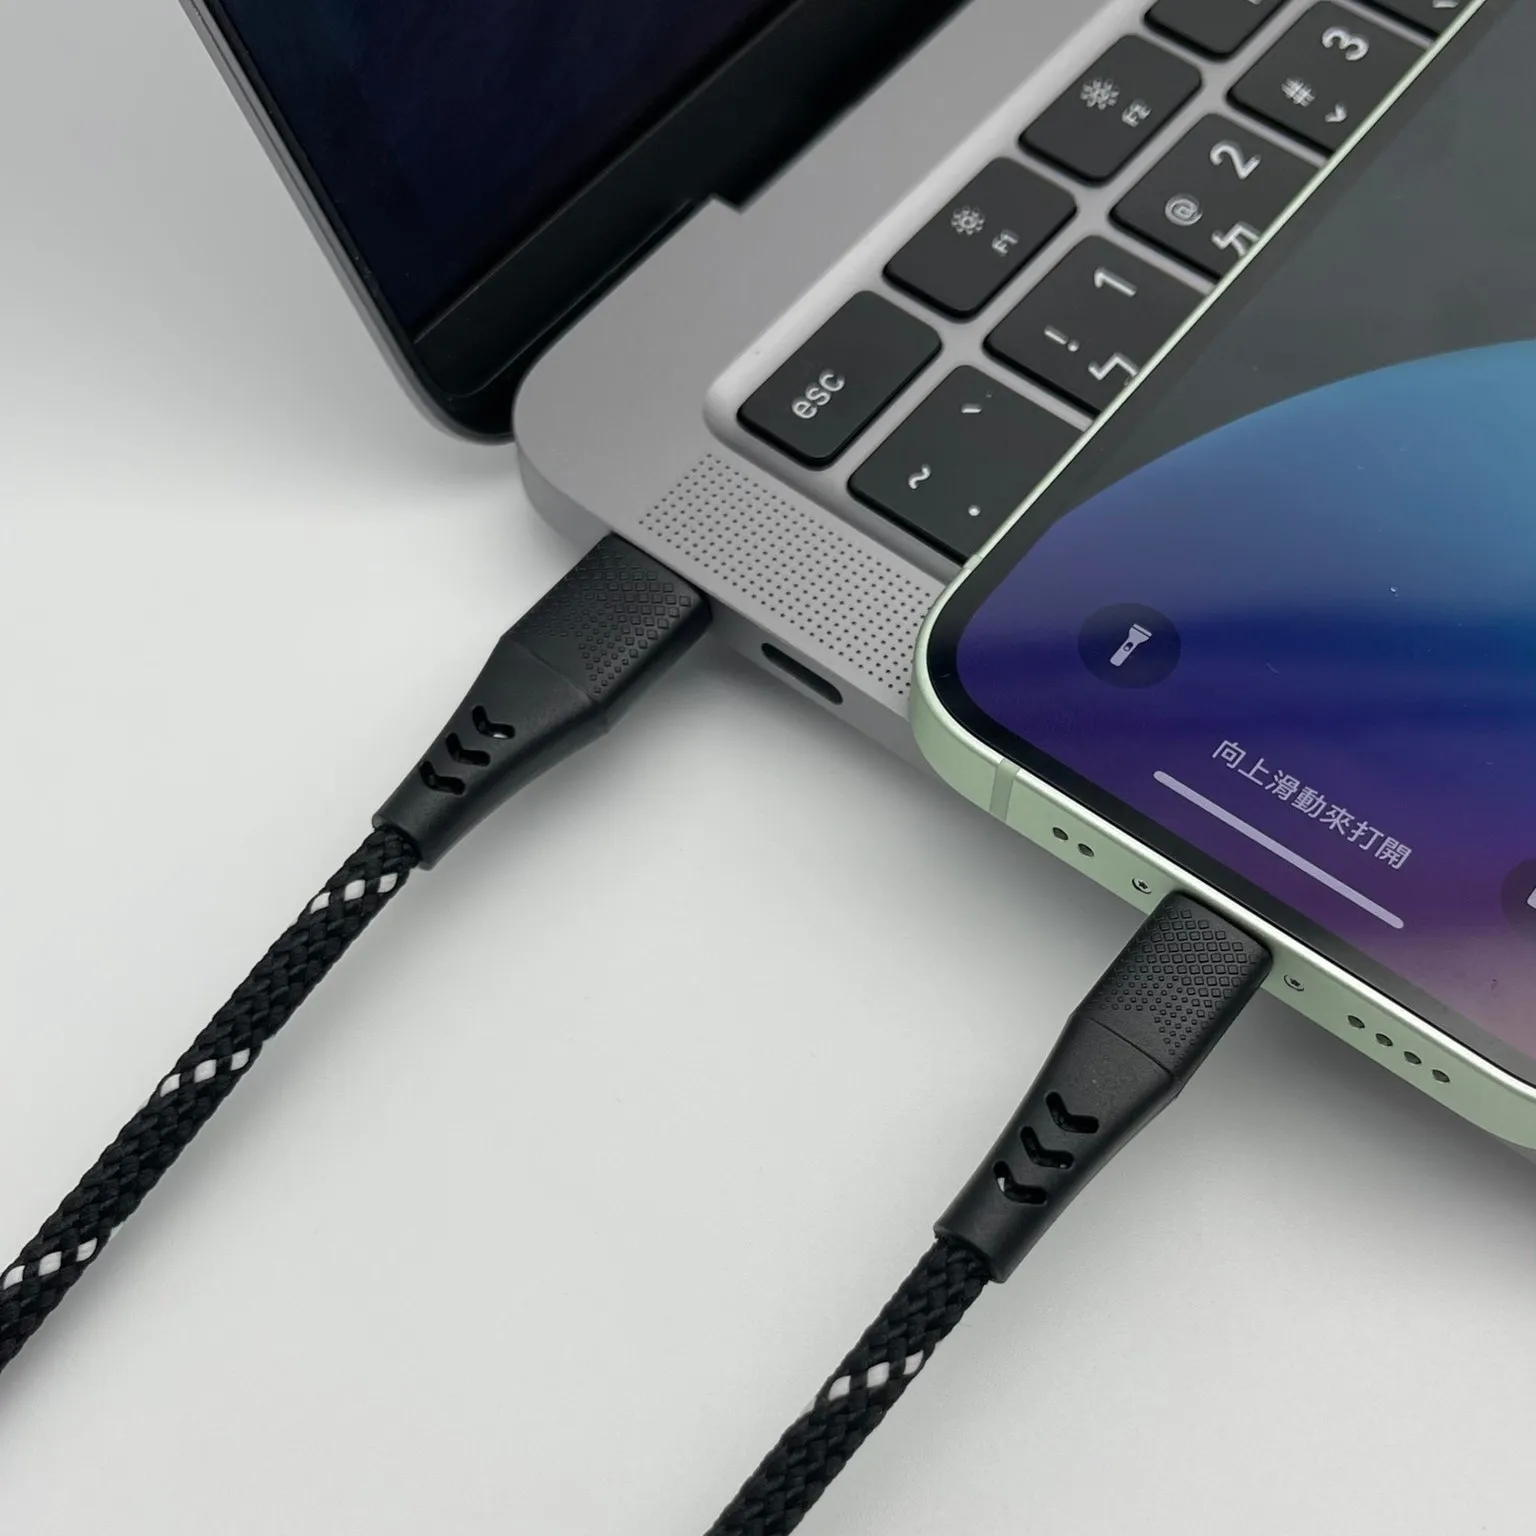 Premium Usb Cable MFi certified fast charging, USB-C to Lightning (C94) 1M, 2M, 3M for iPhone data cable